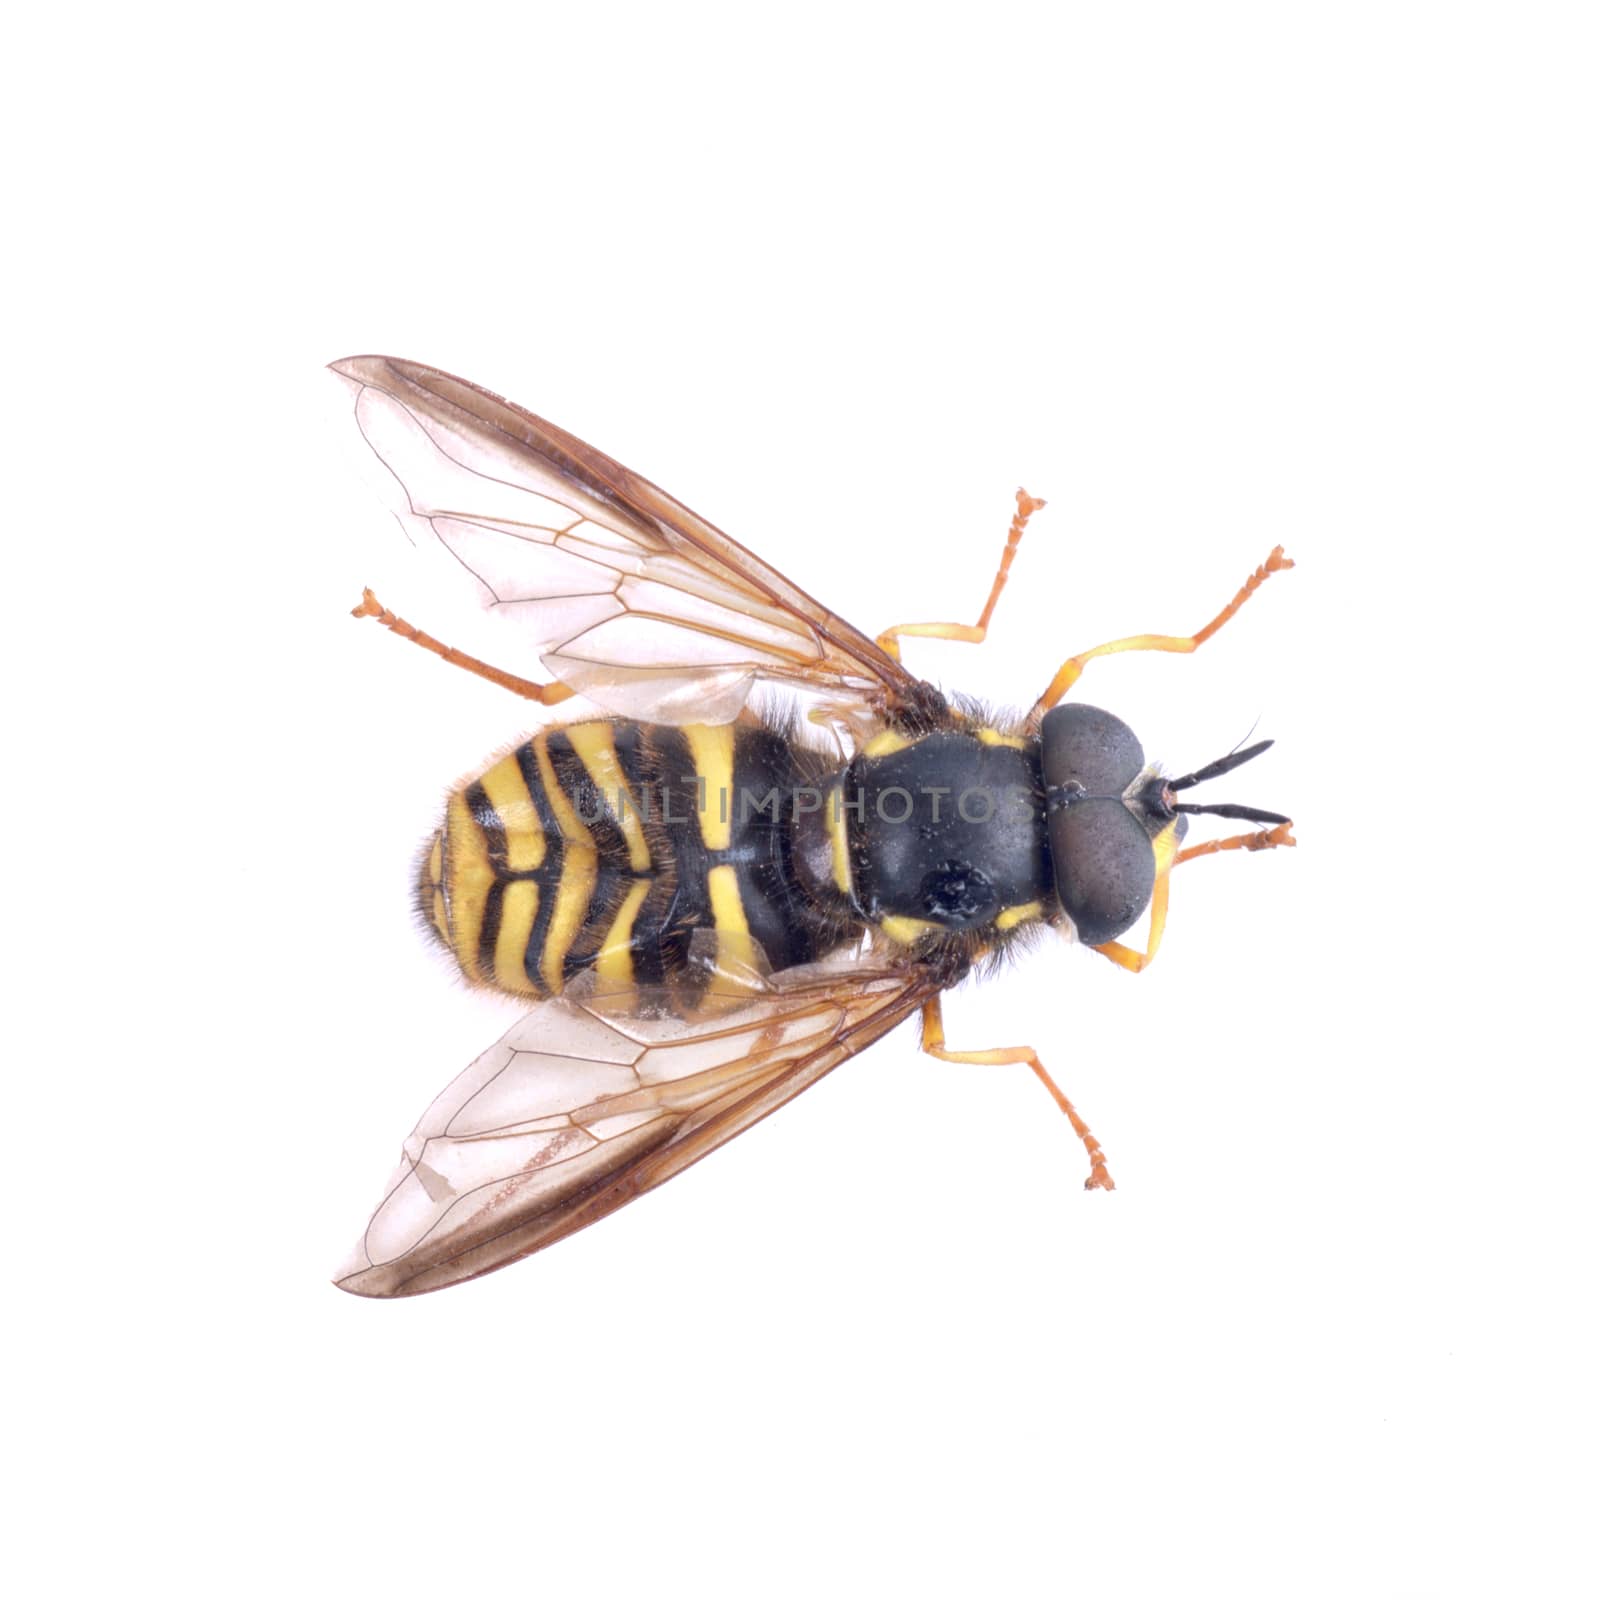 Black yellow striped fly isolated on a white background